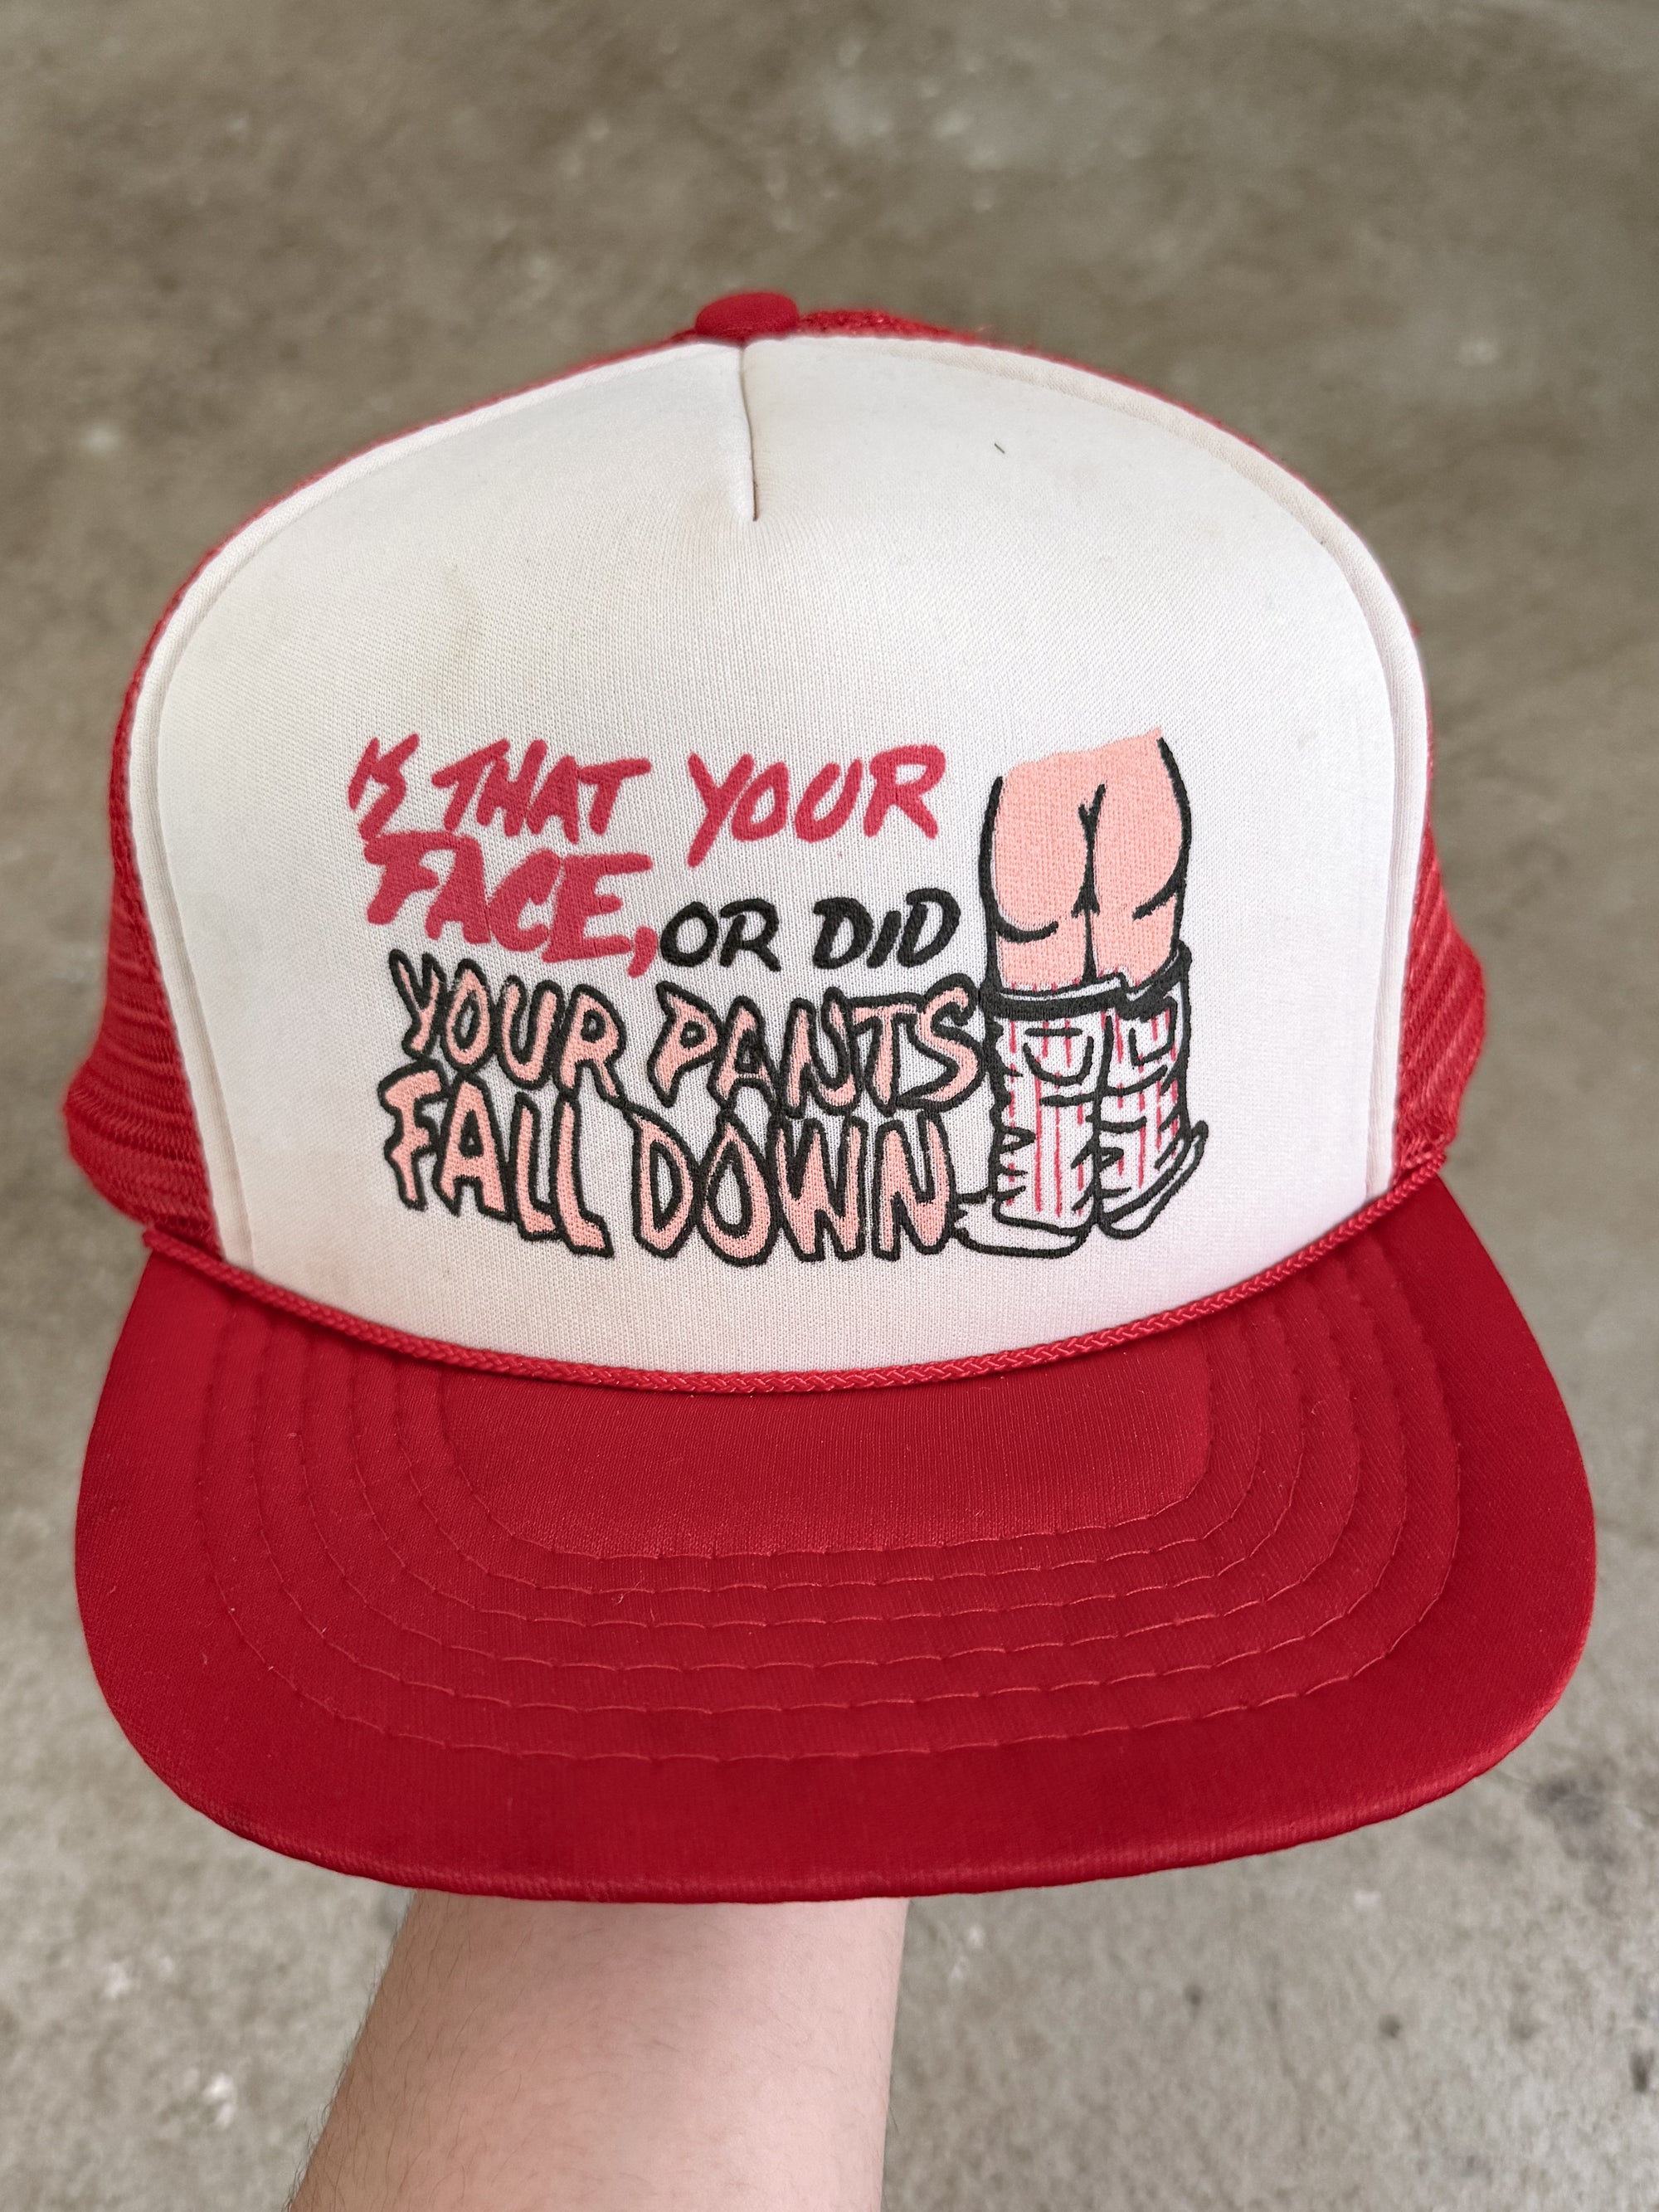 1980s/90s "Is That Your Face..." Trucker Hat